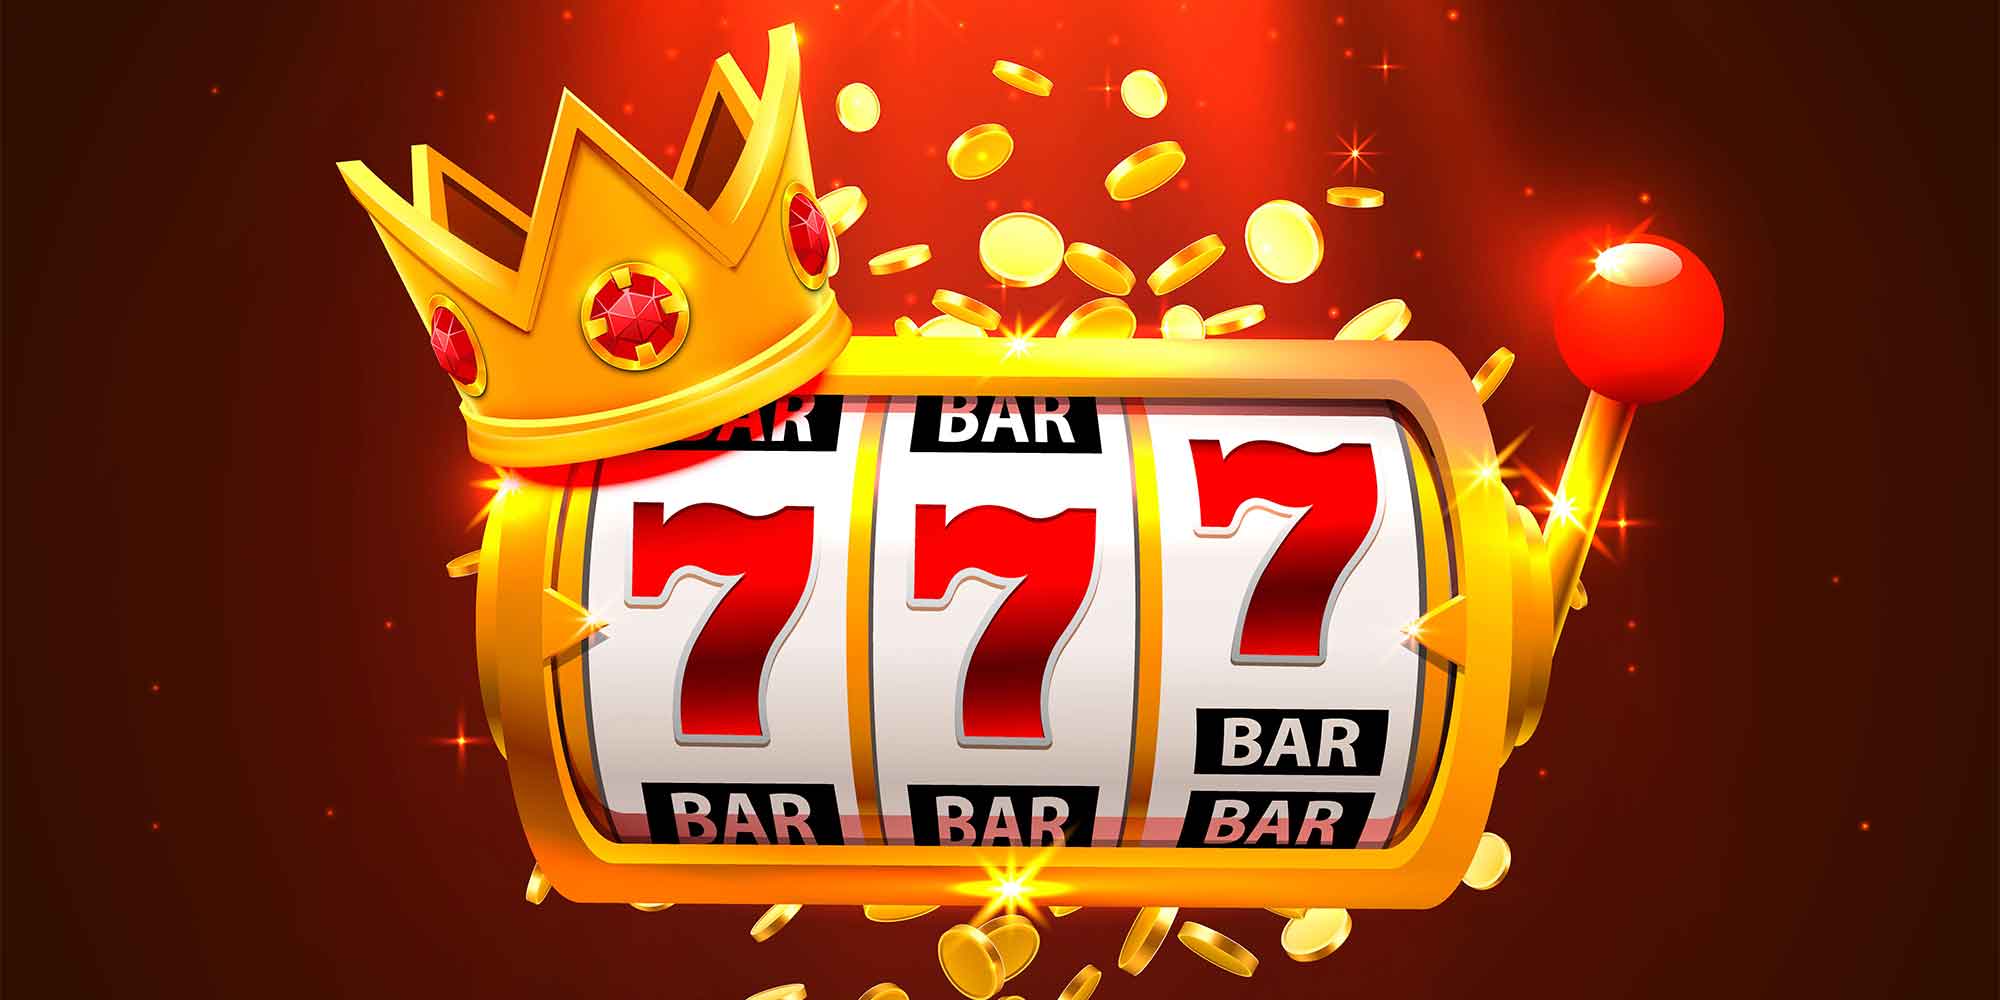 Online casinos with free slots spins – Bonuses and promotions